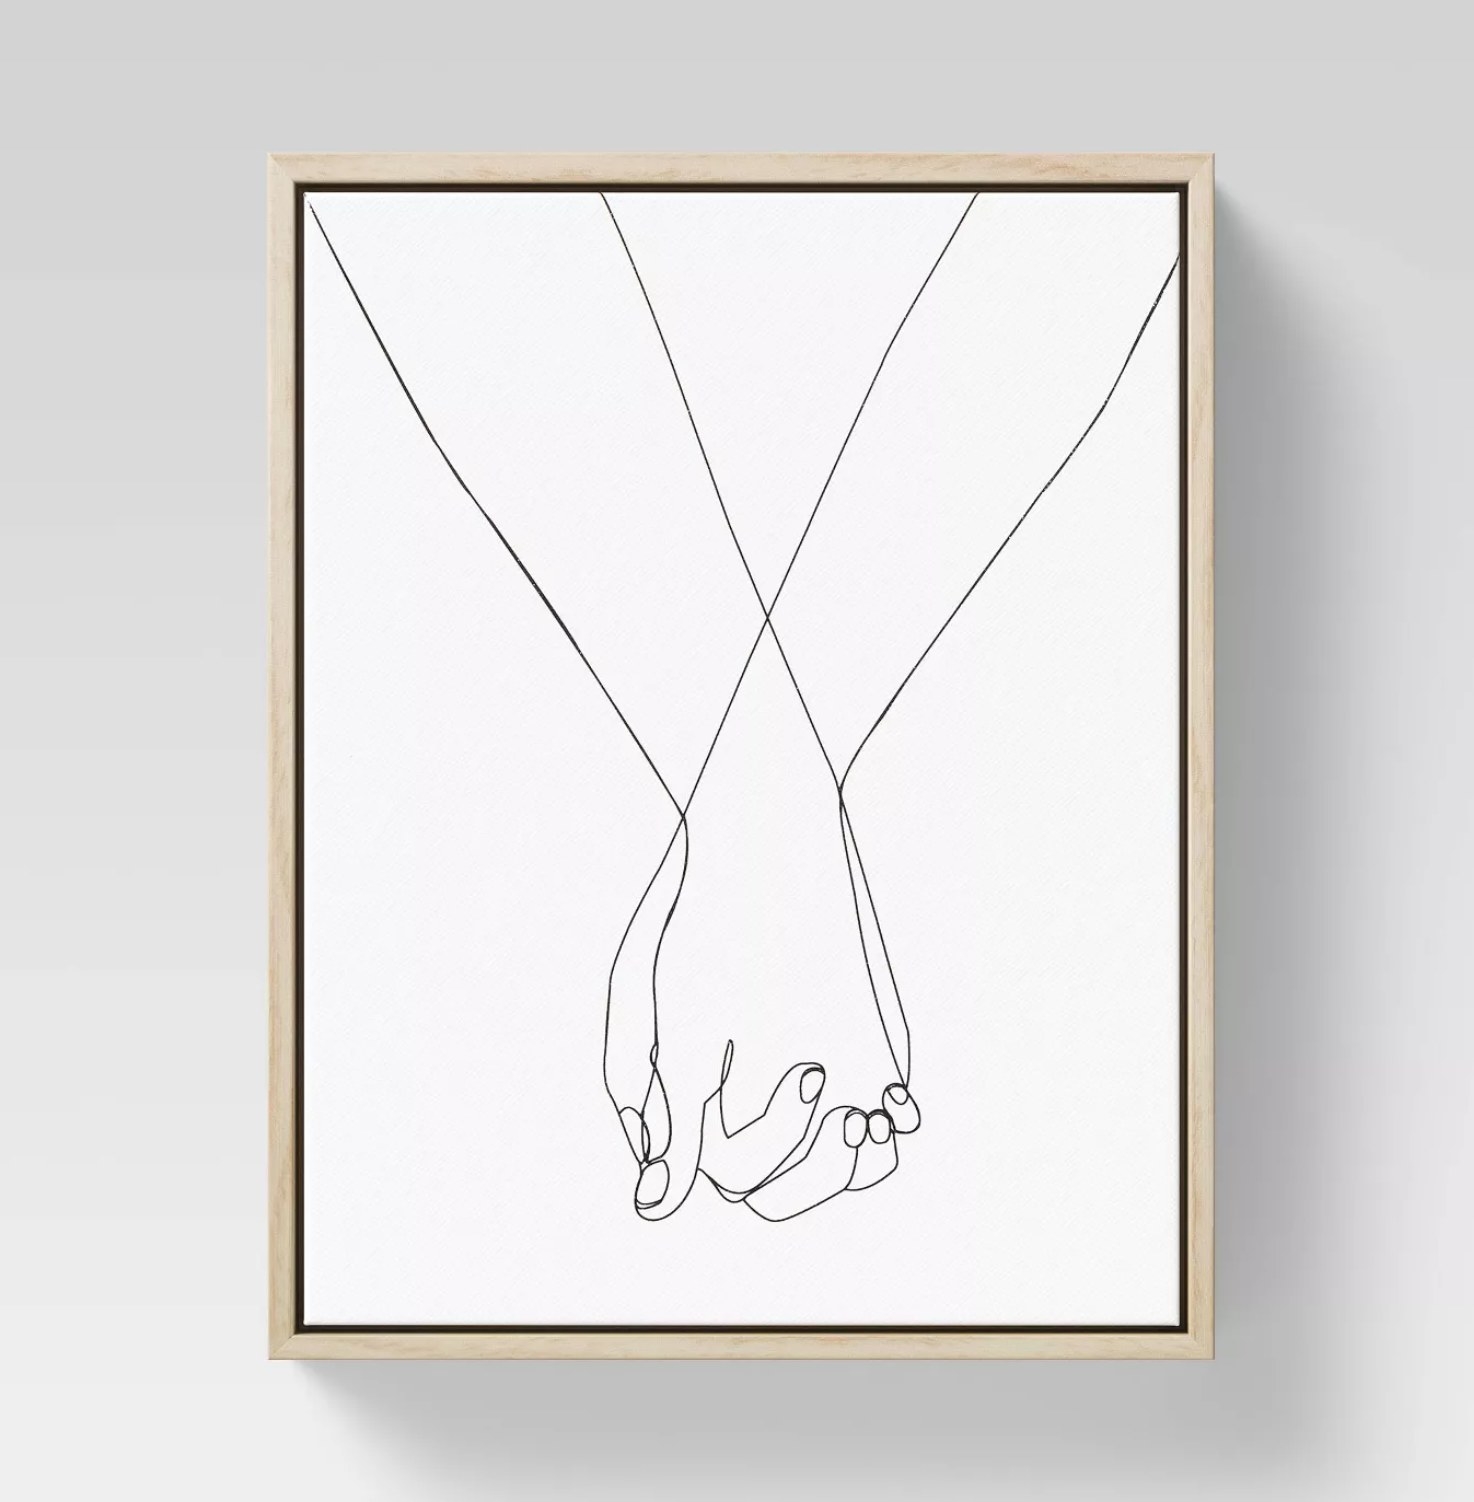 the line drawing of two holding hands